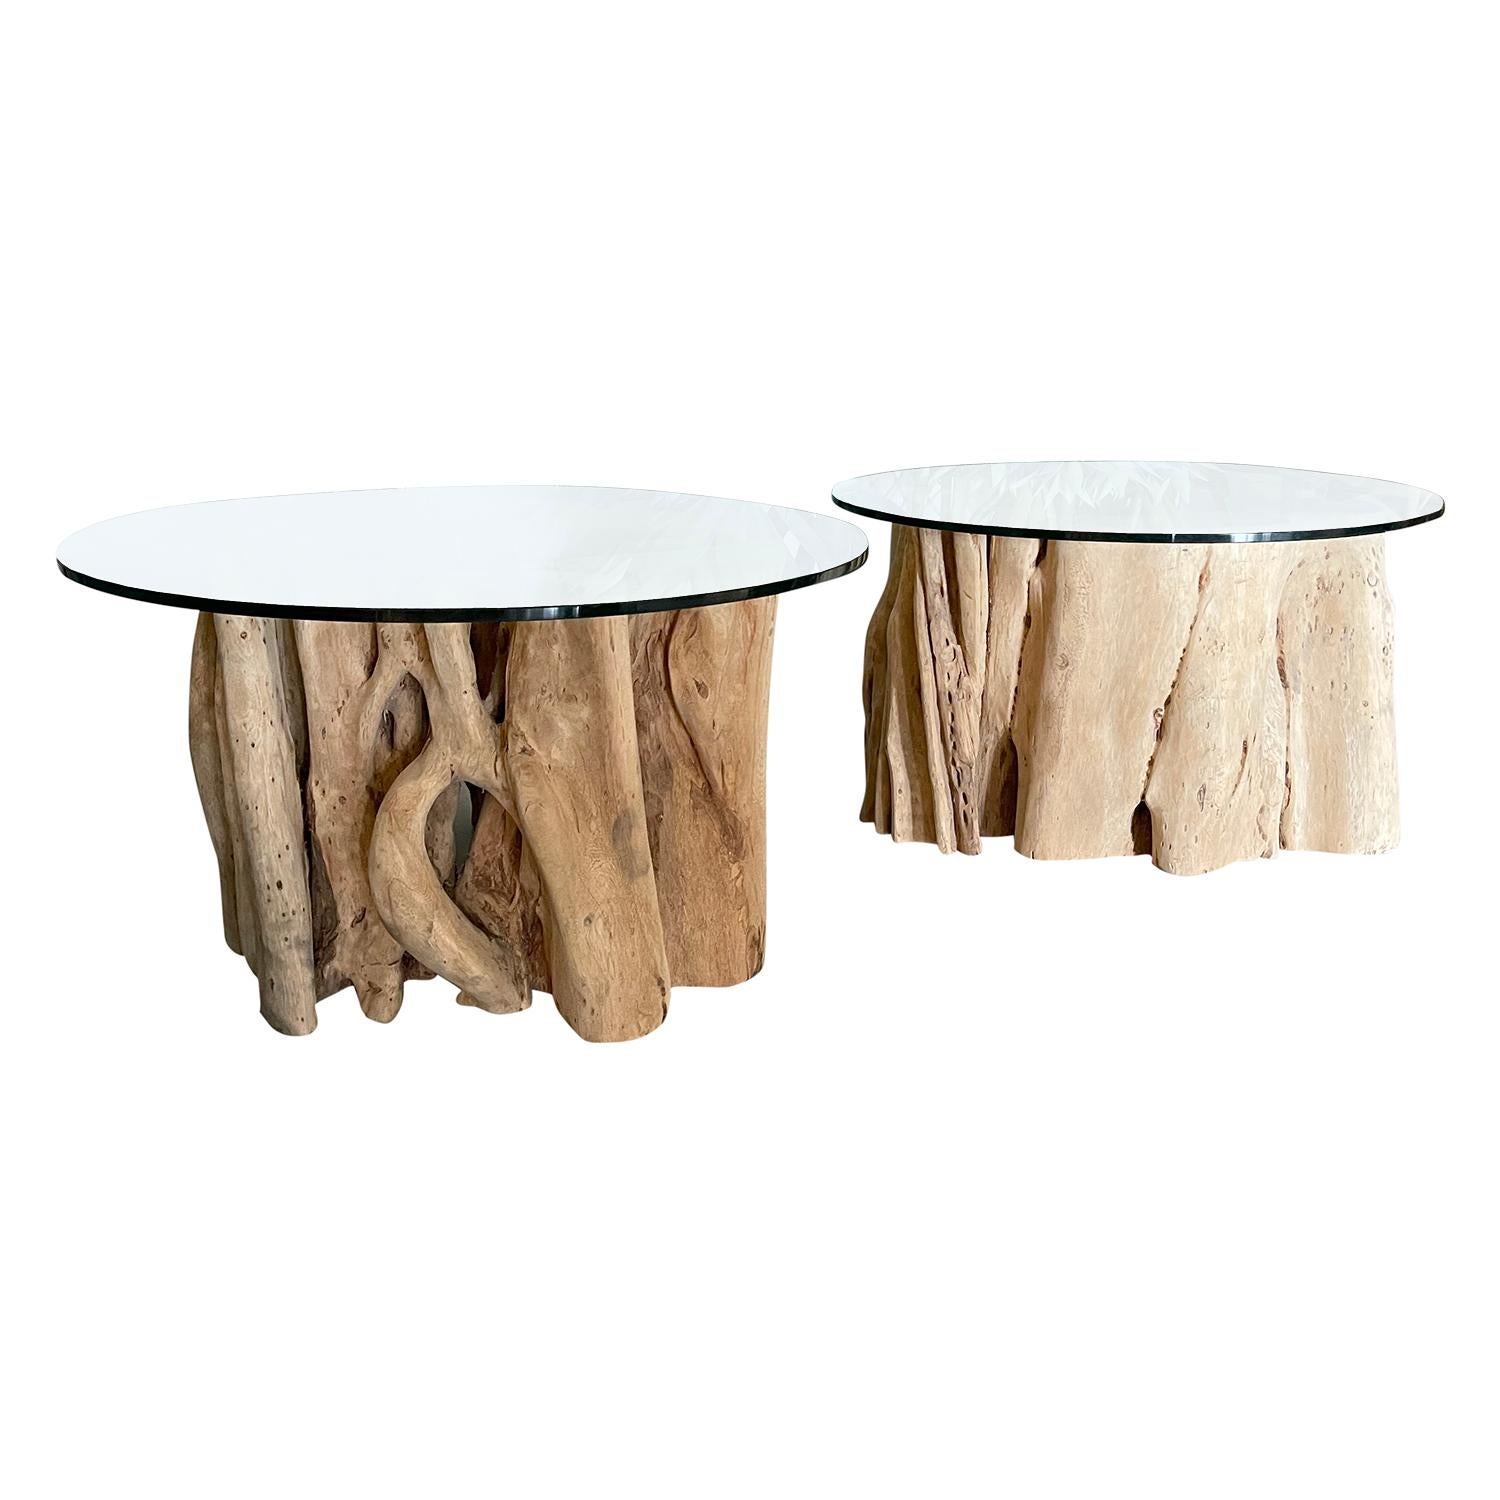 Belgian Similar Set of Monkey Wood Coffee Tables - Liana Glass Tables For Sale